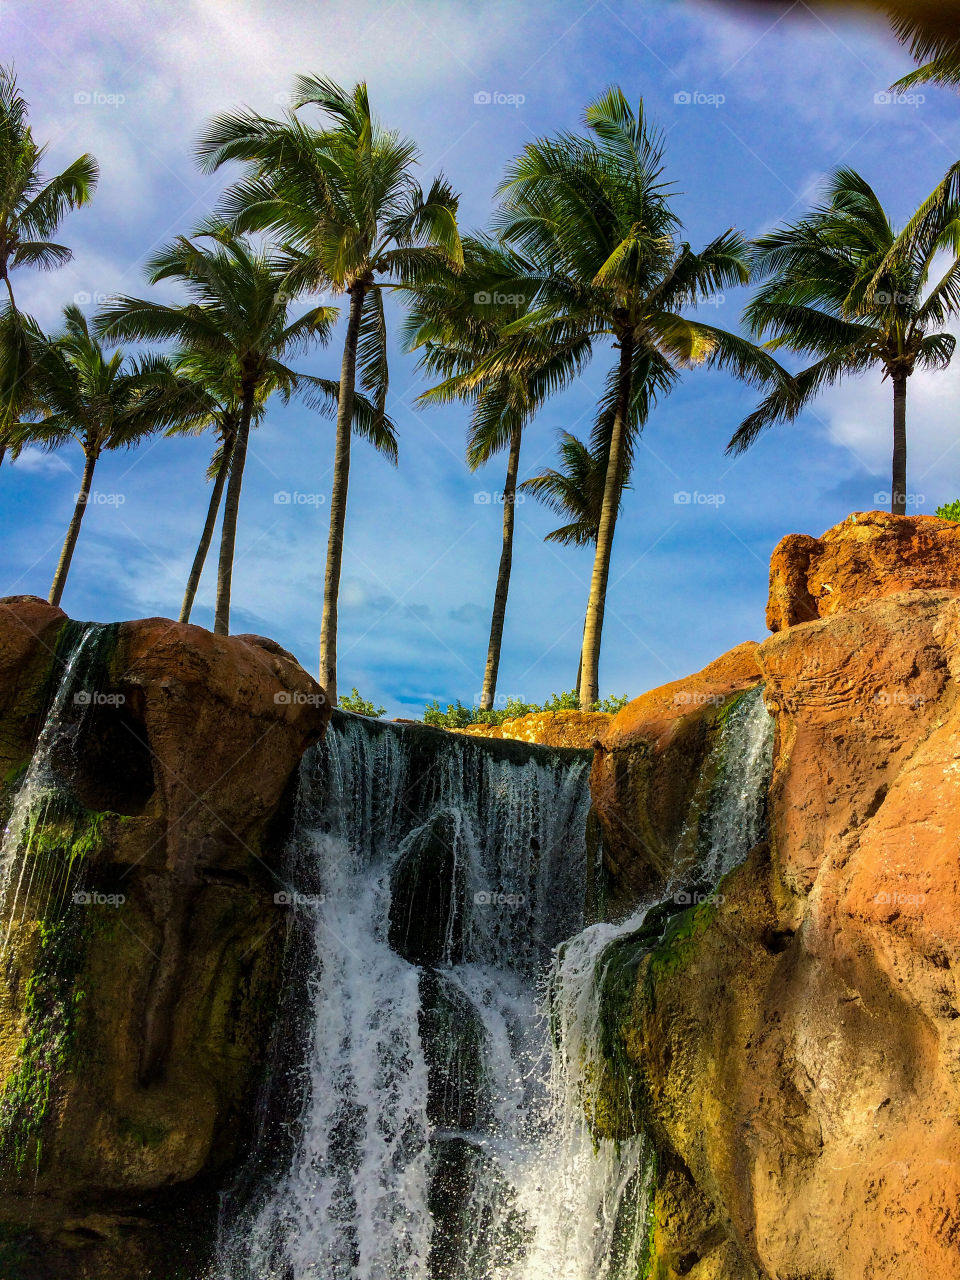 Beautiful water falls and palm trees